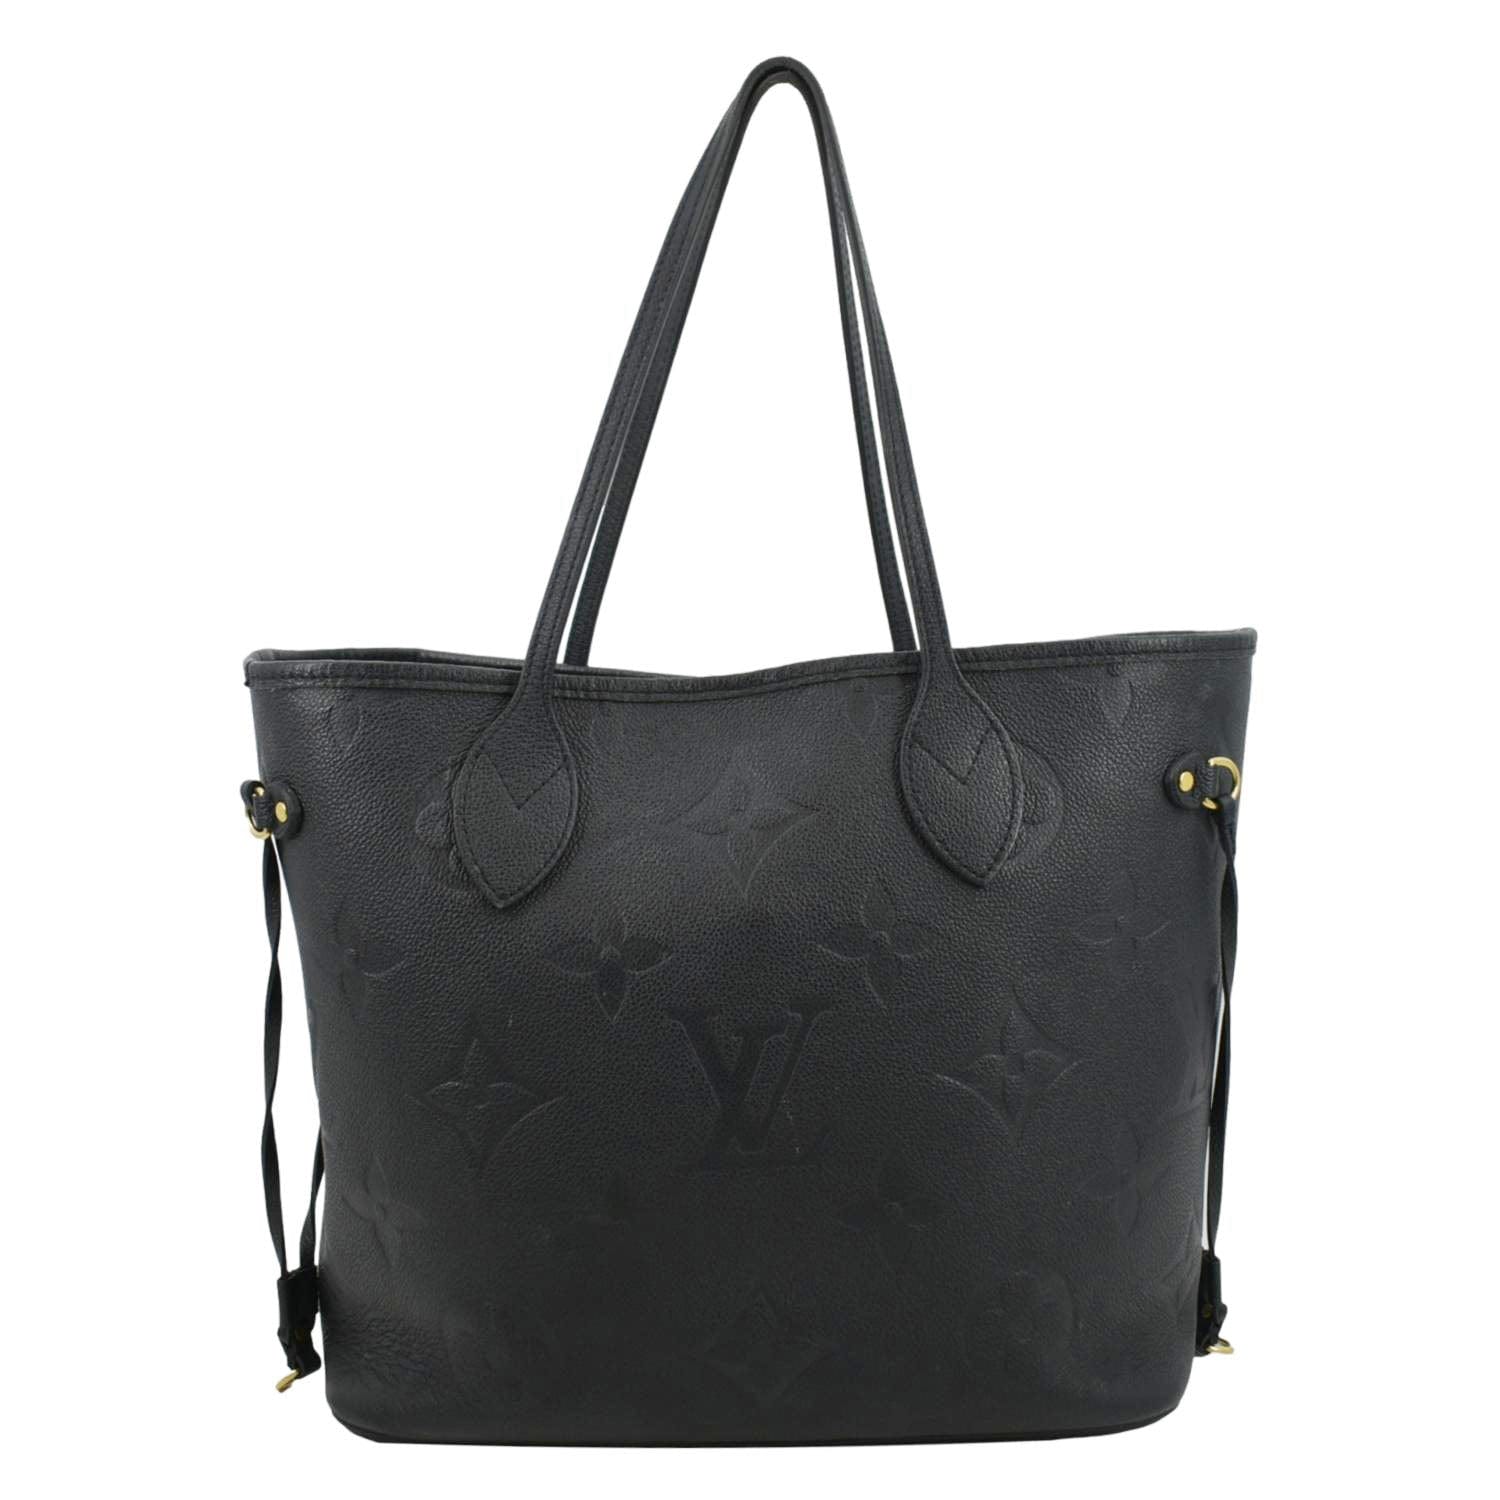 LV NEVERFULL IN EMPREINTE LEATHER